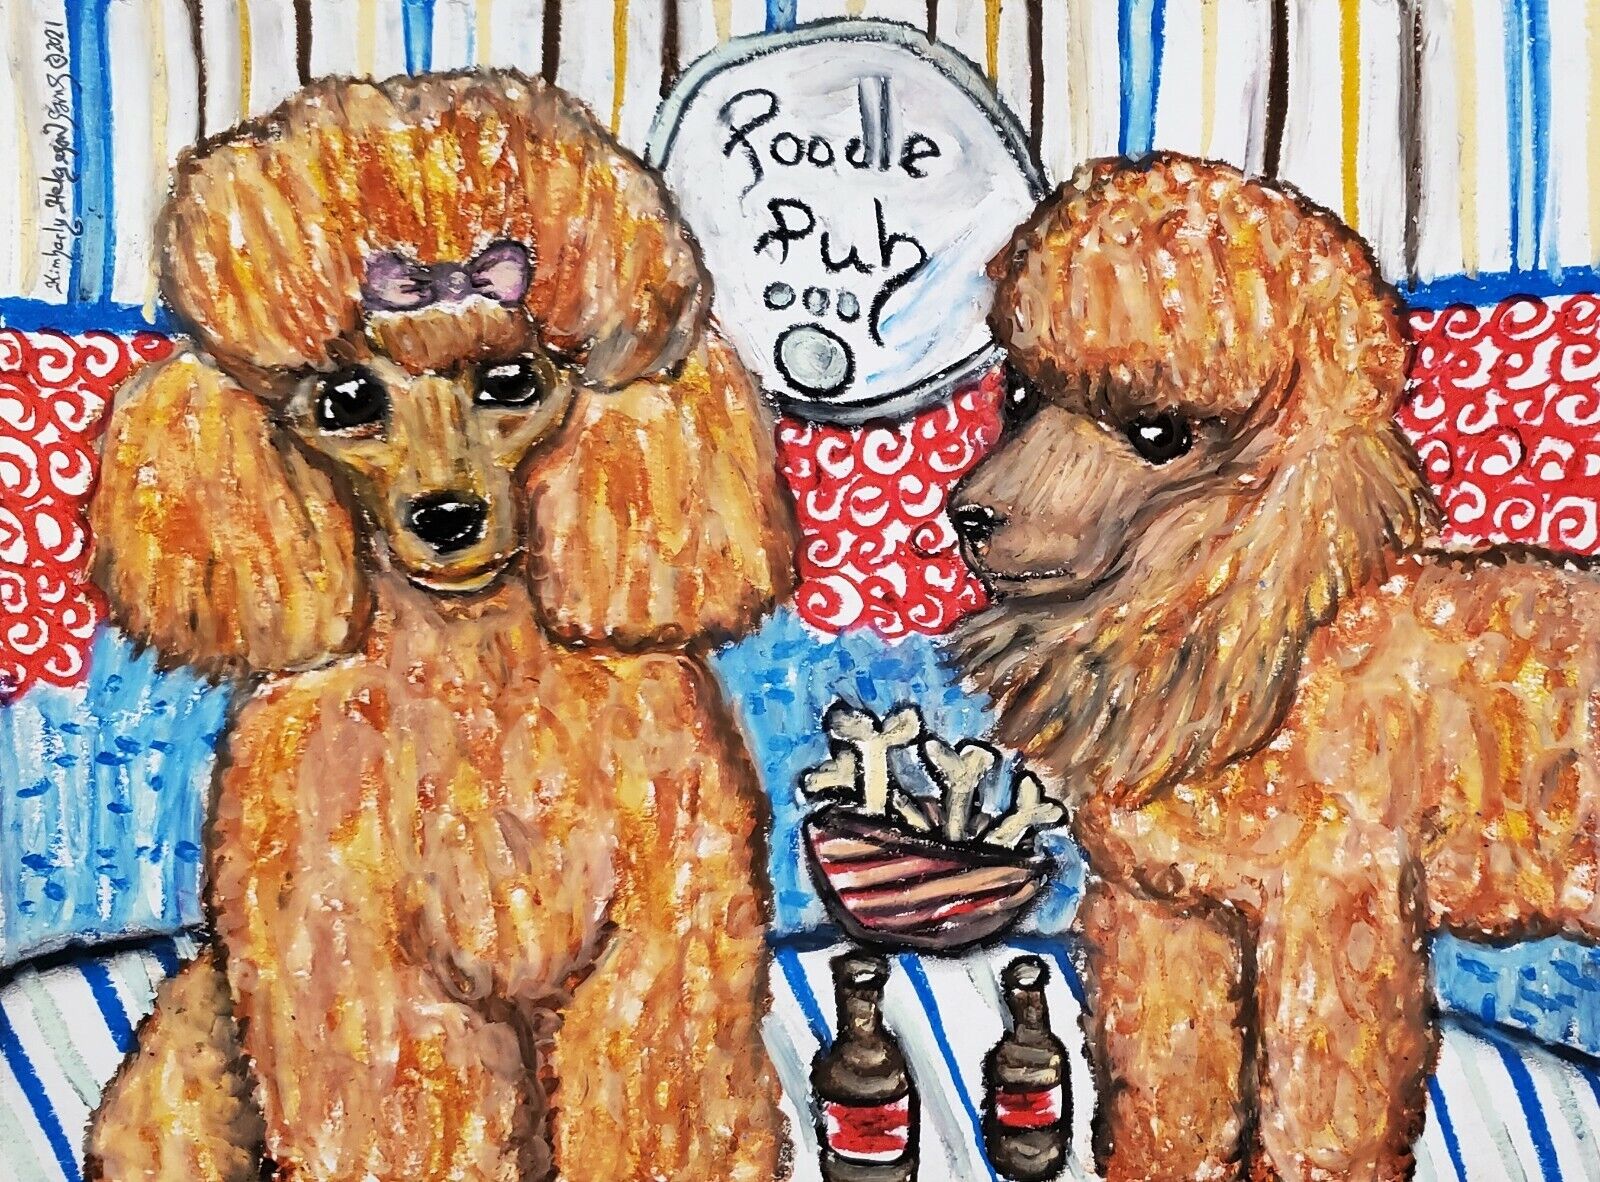 TOY POODLE at the PUB Collectible 13x19 Dog Pop Art Print Signed by Artist KSams